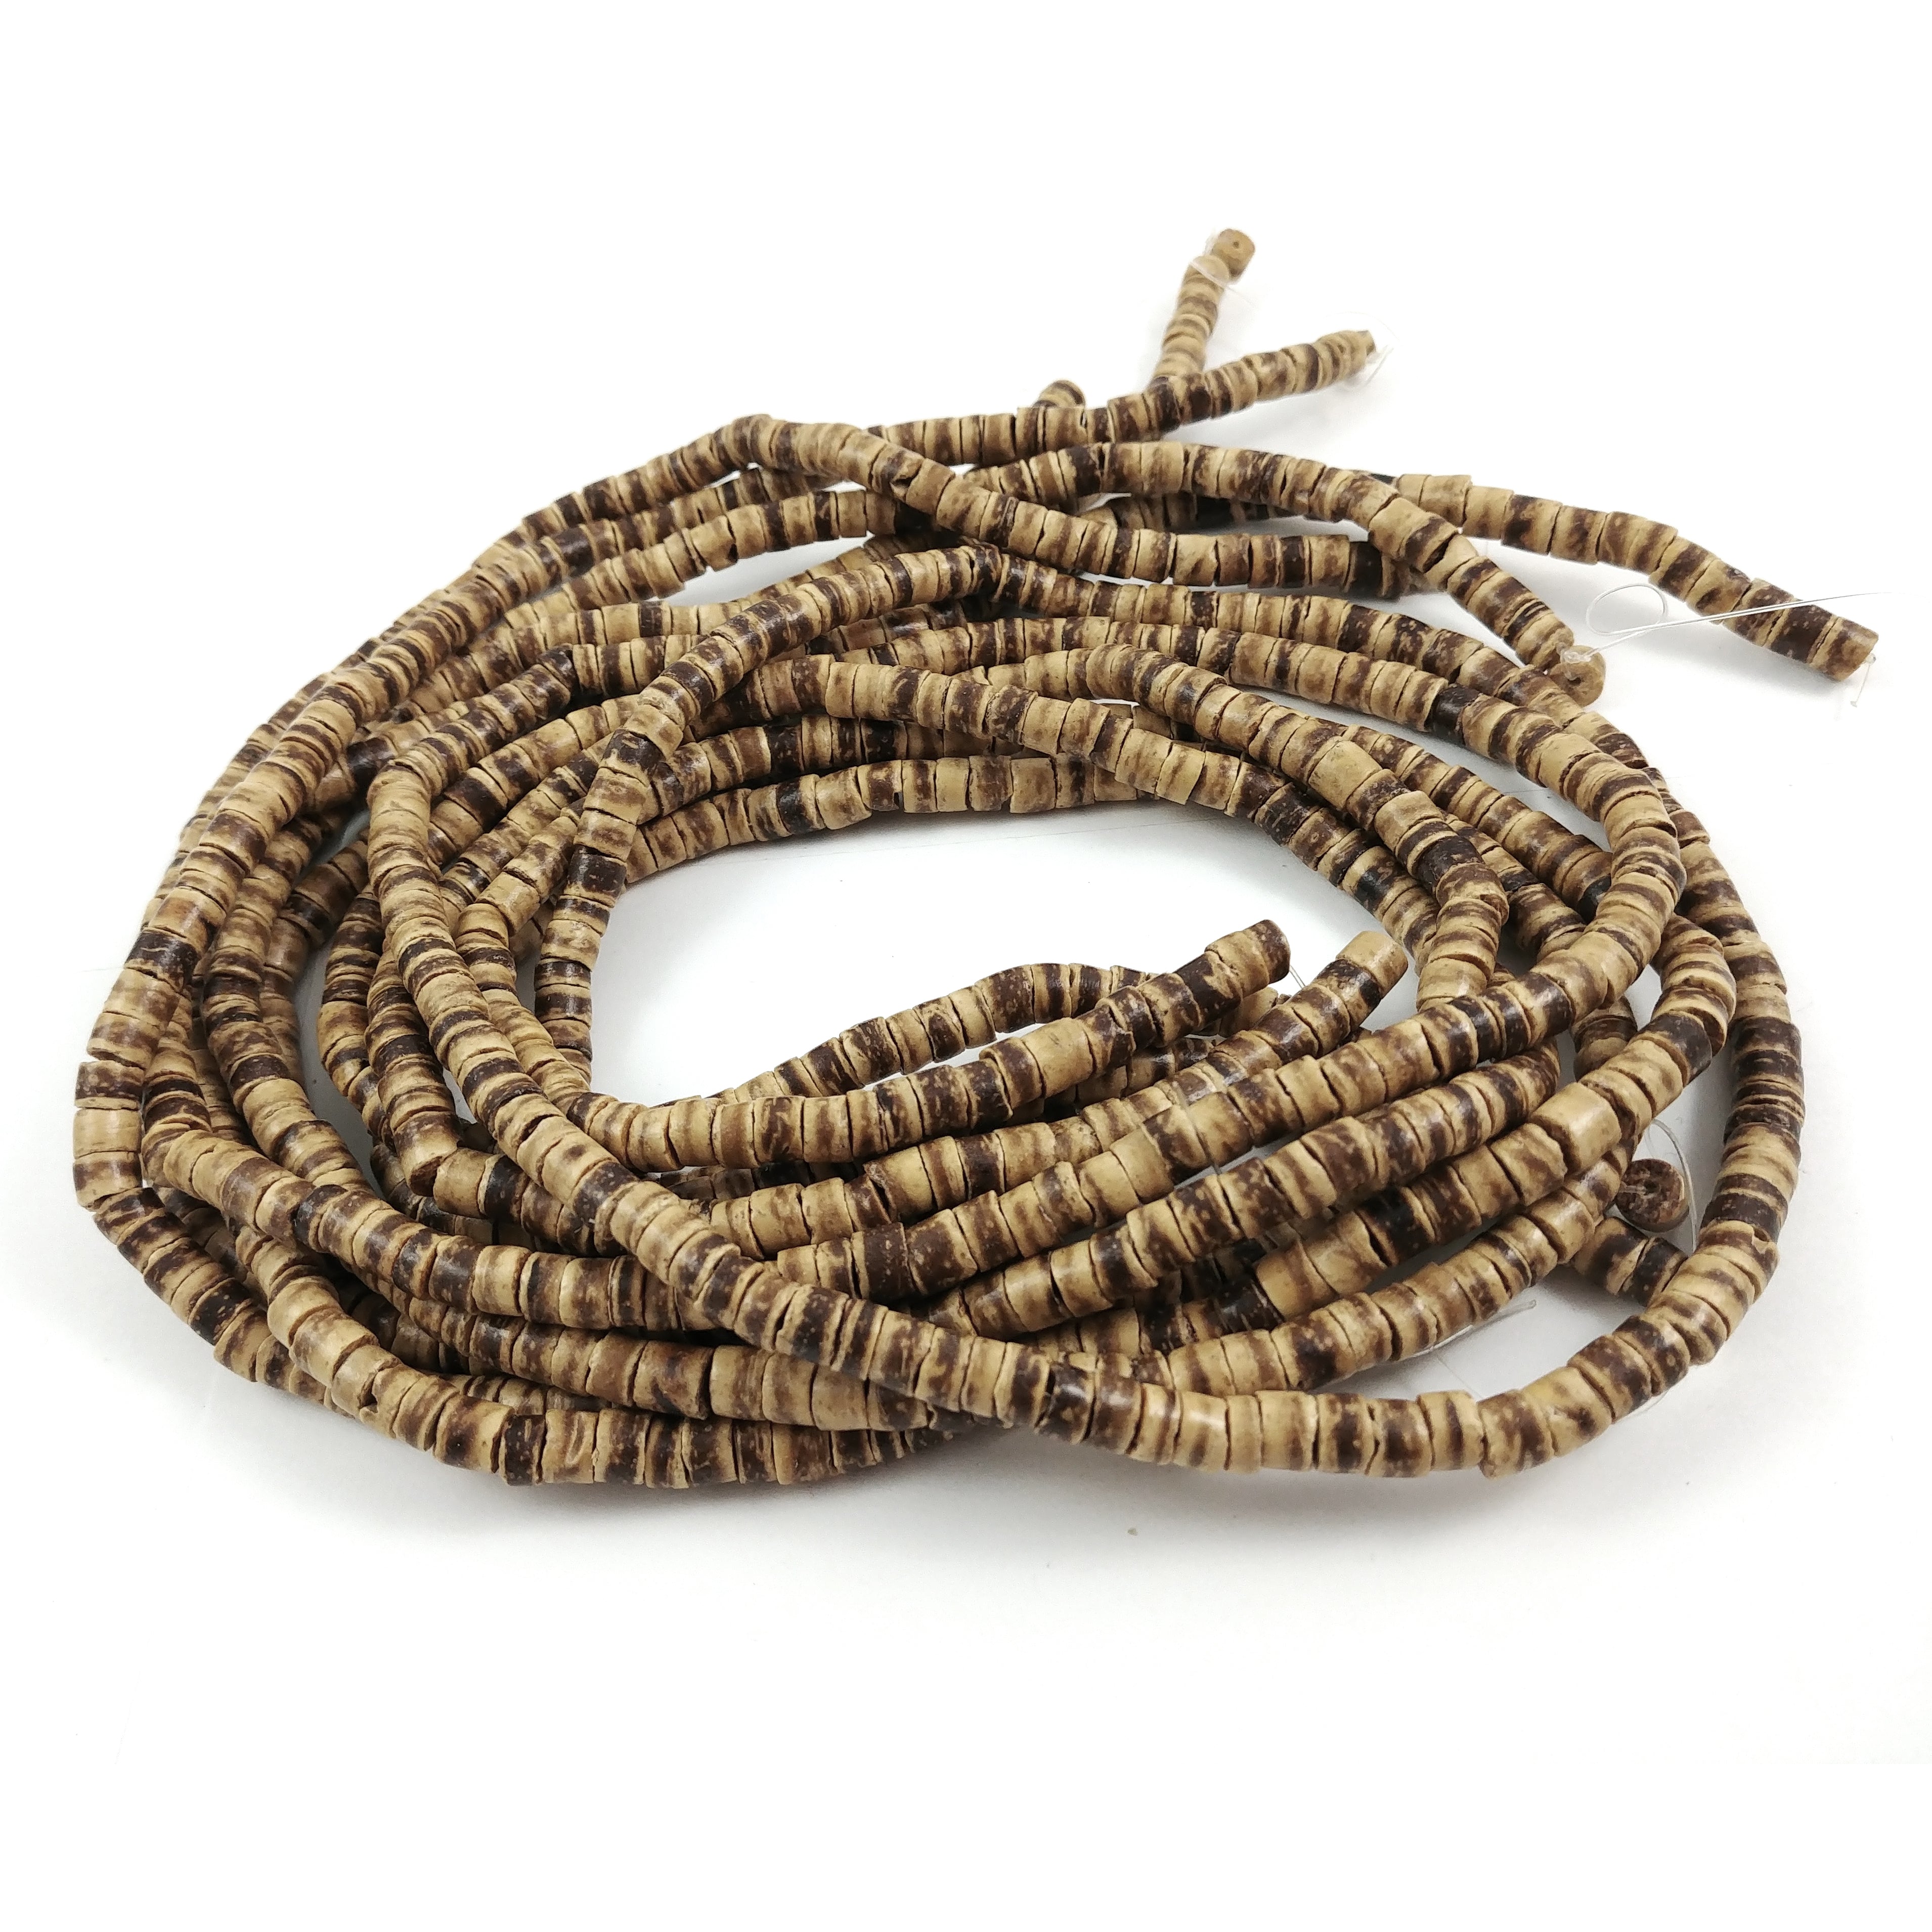 150 Natural beige coconut wood Beads - Donuts Rondelle Disk Heishi Beads 5mm